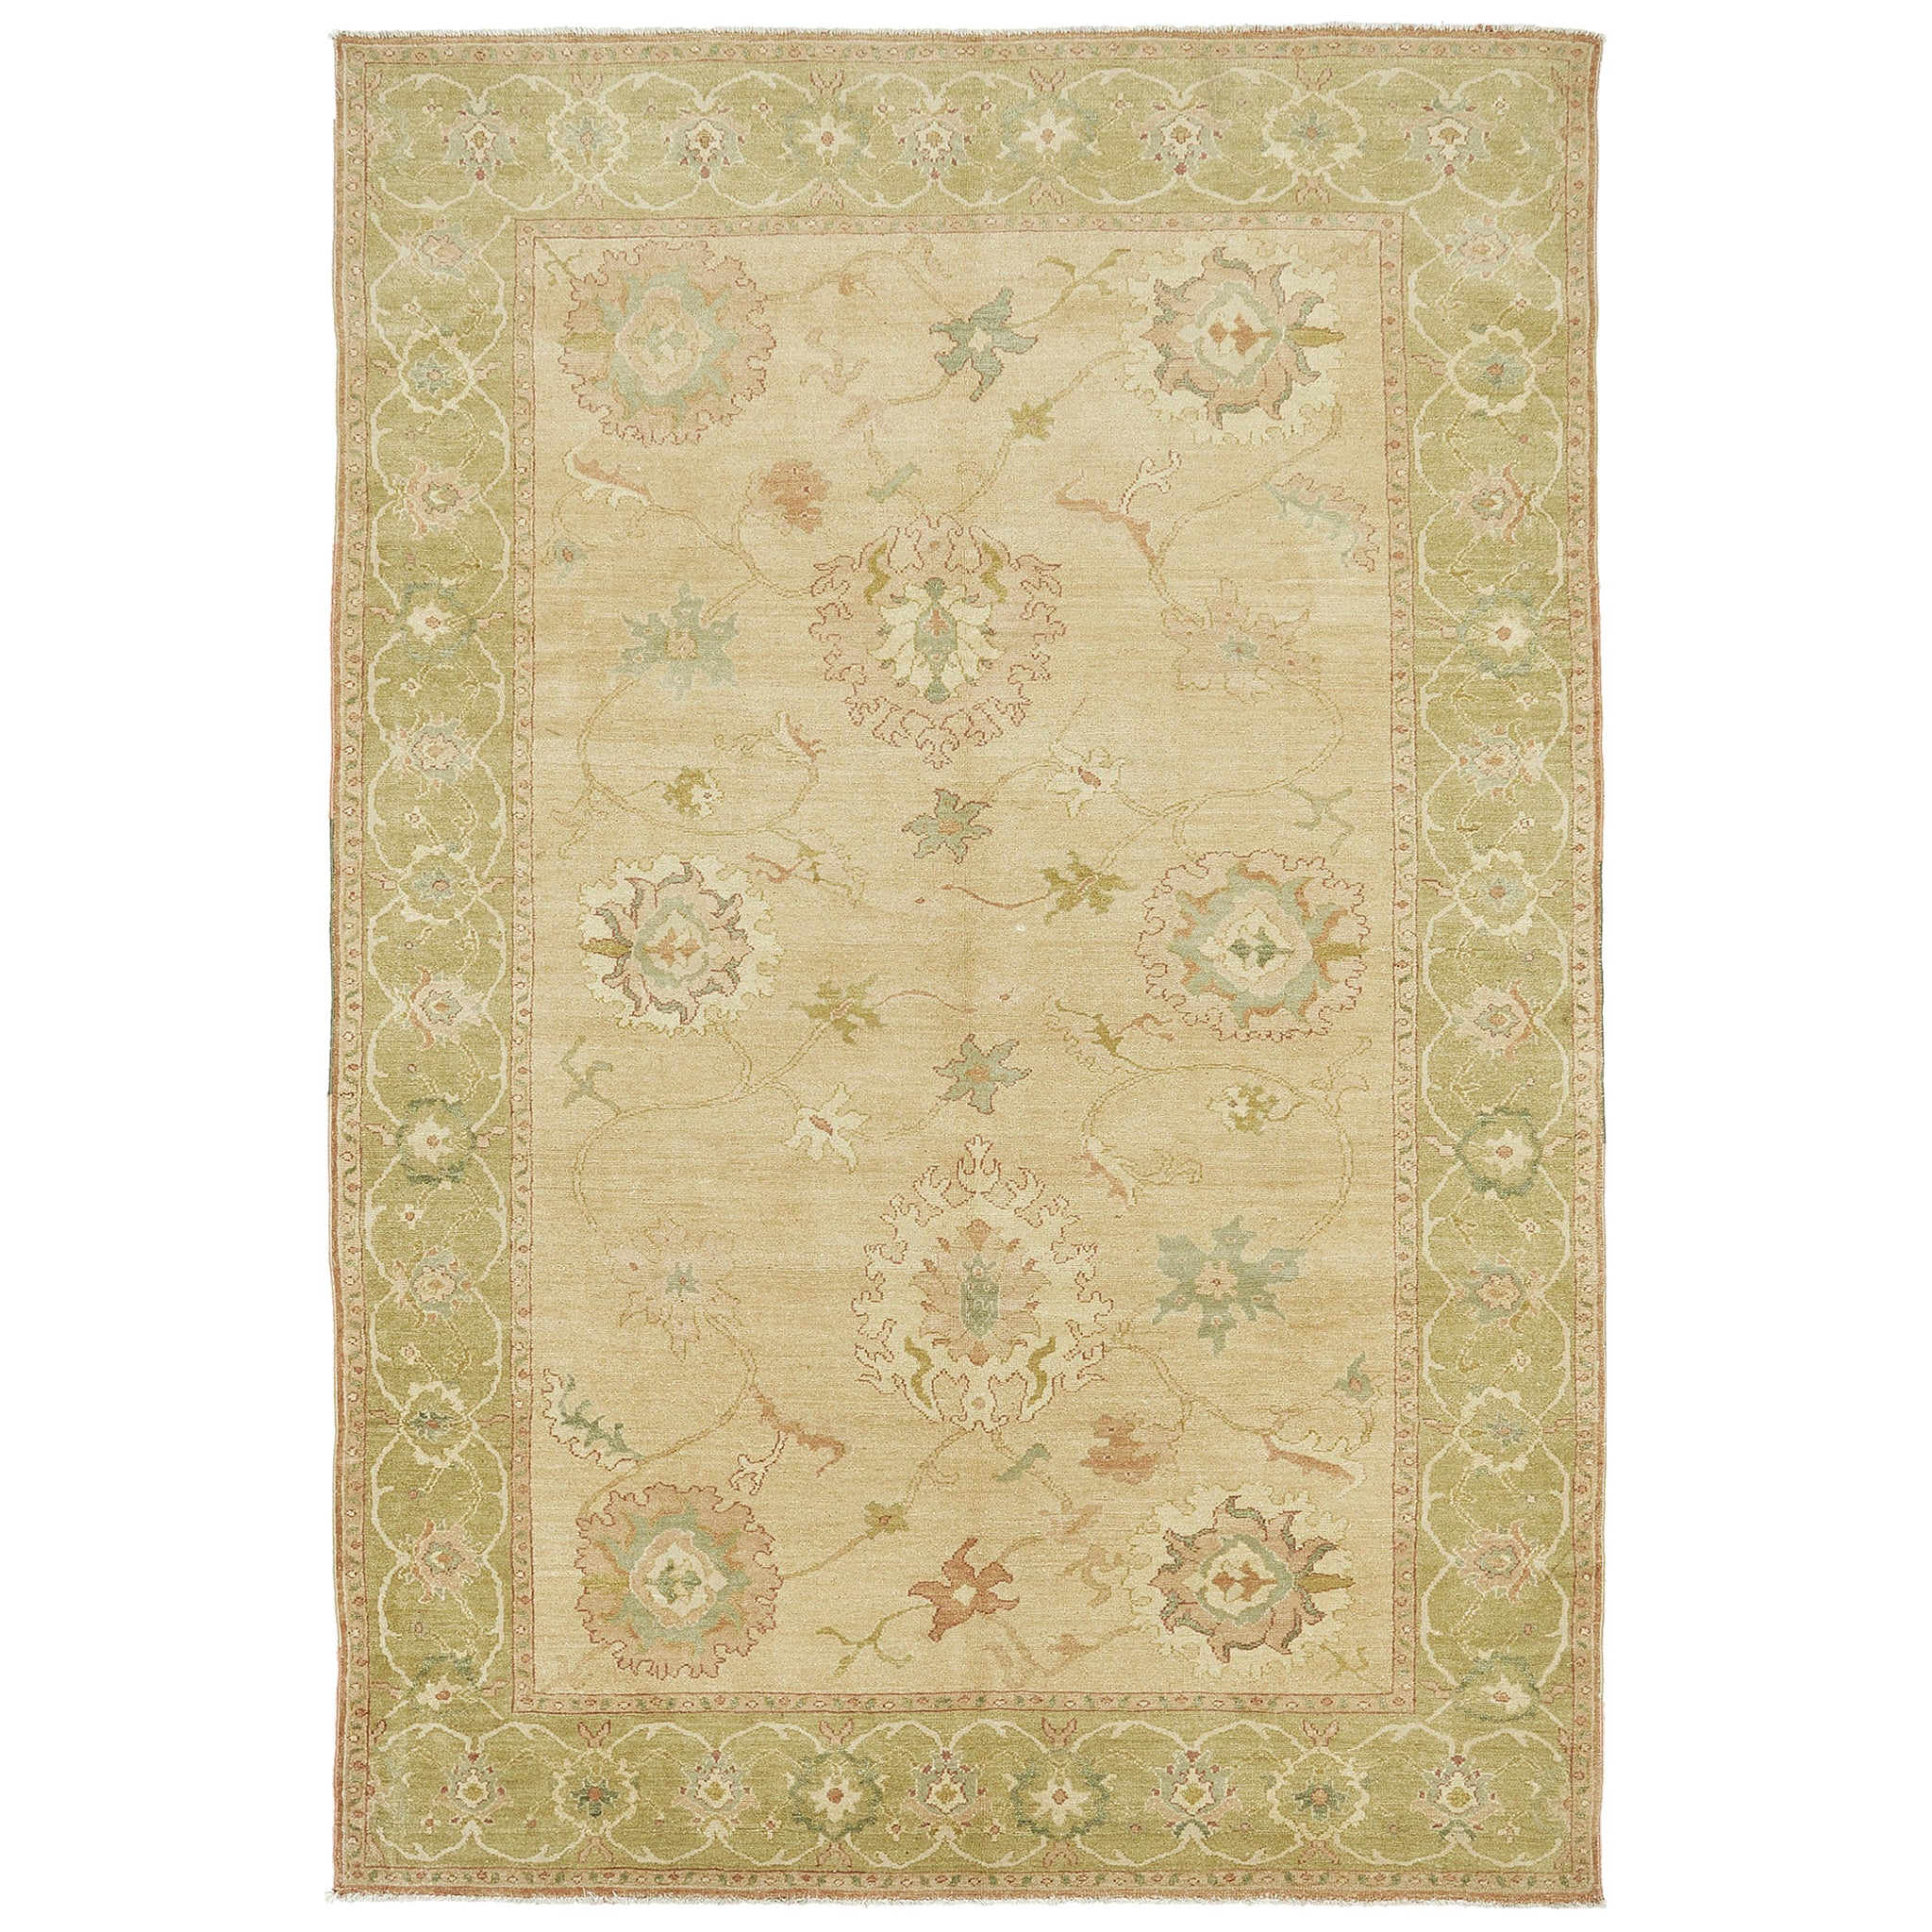 Egyptian Sultanabad Design Revival Rug